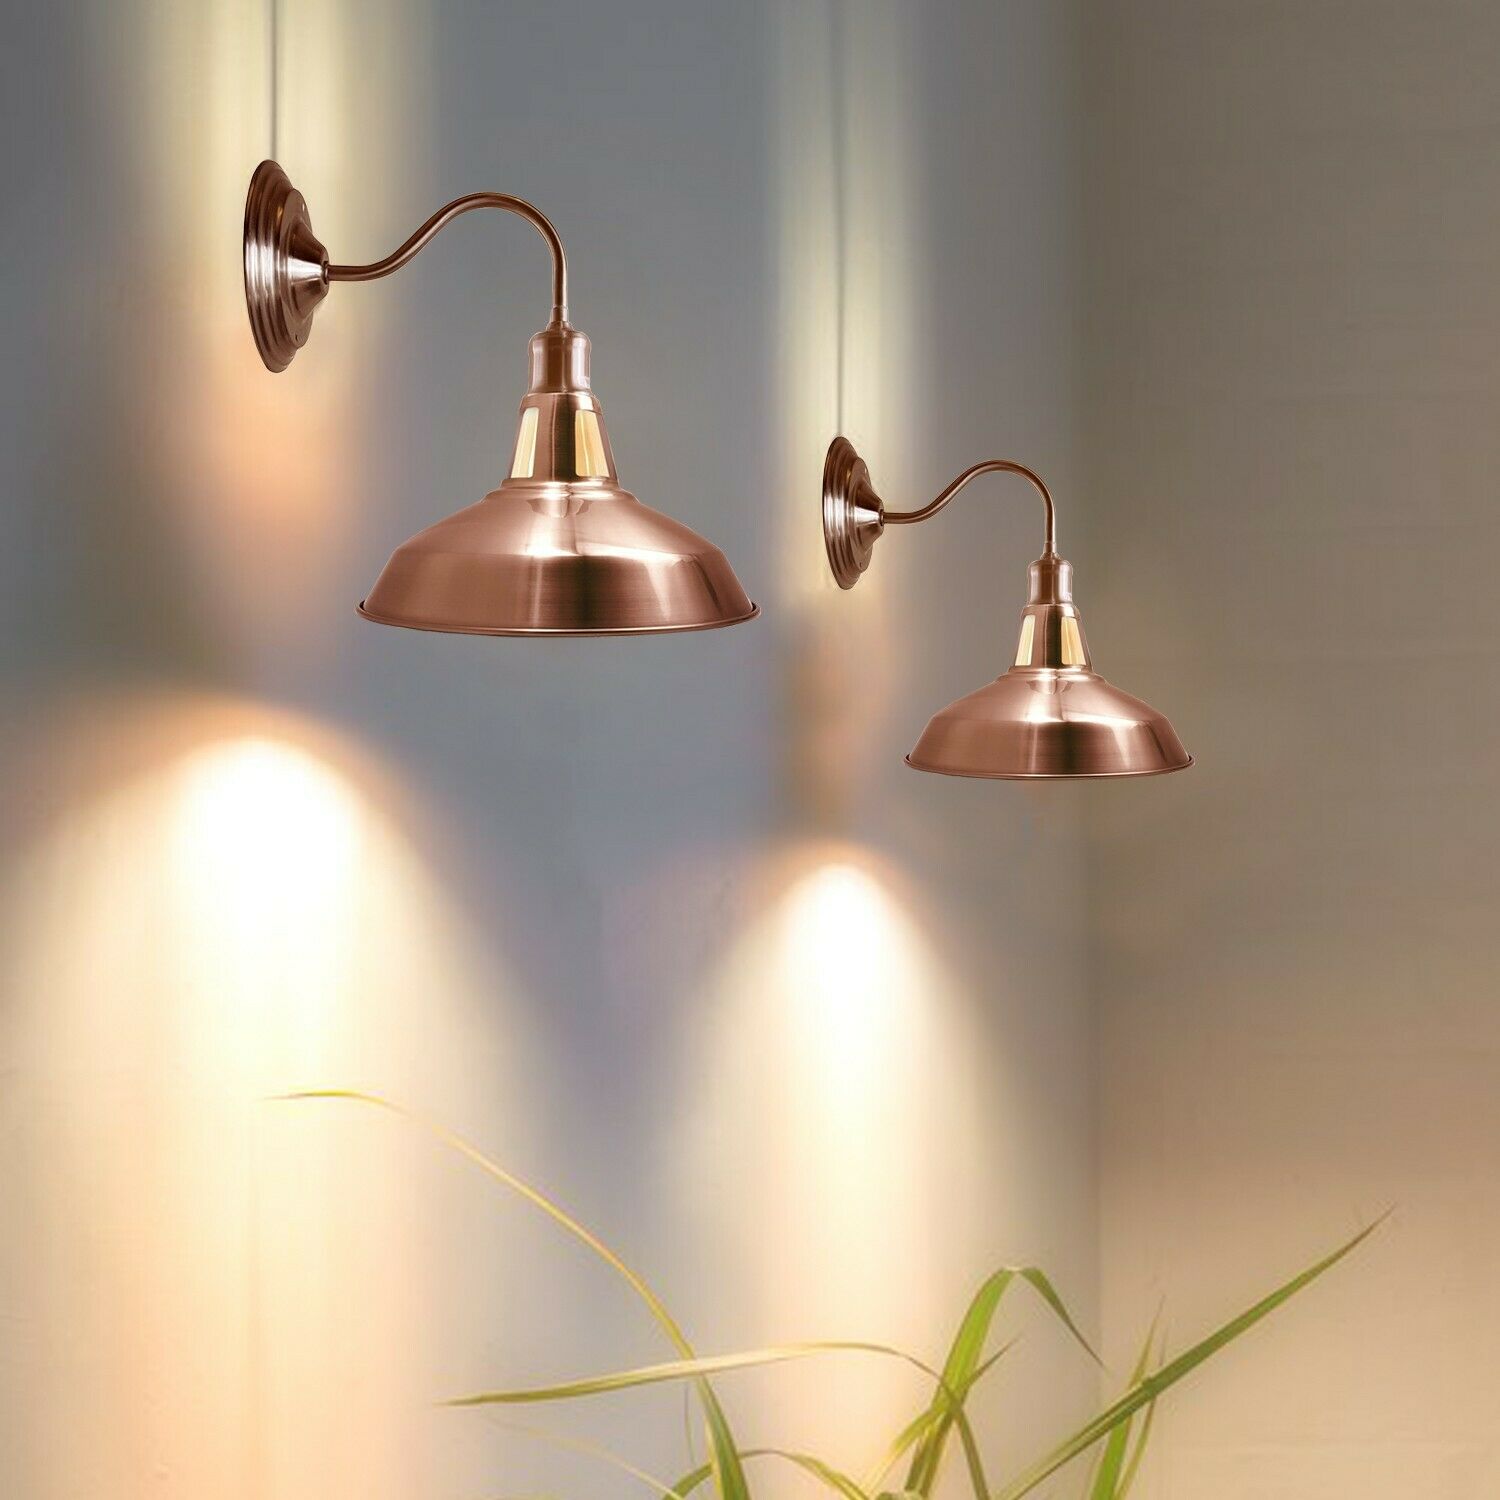 Modern Style High Polished Copper Wall Sconce with Vintage Retro Industrial Wall Light Shade-Application image